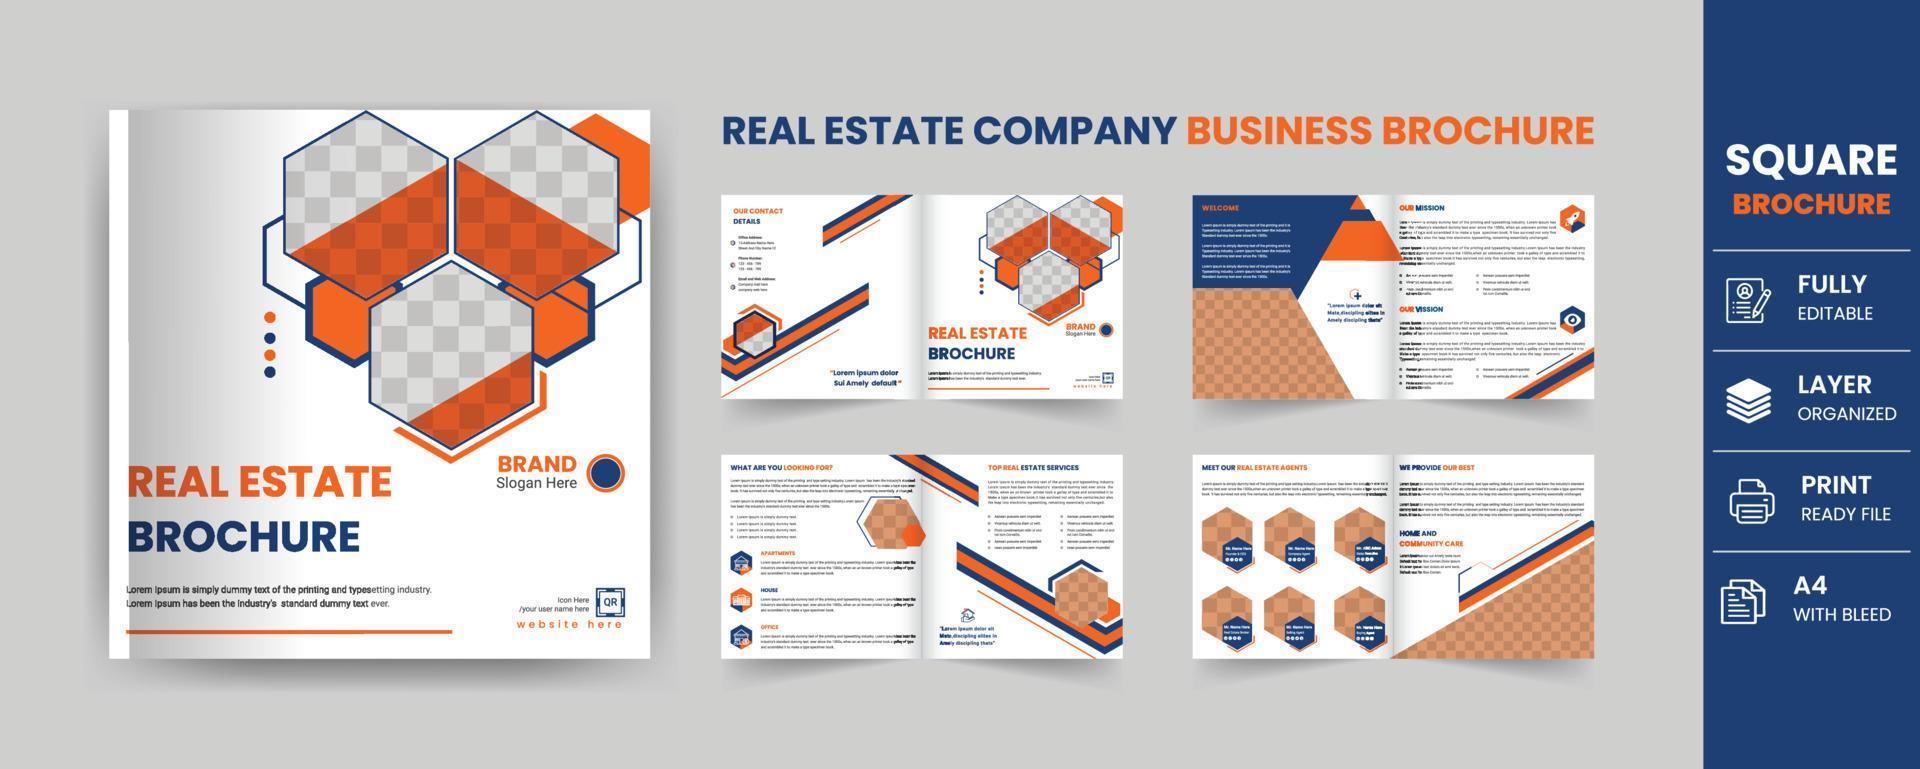 Corporate real estate business square brochure template design 8 pages vector